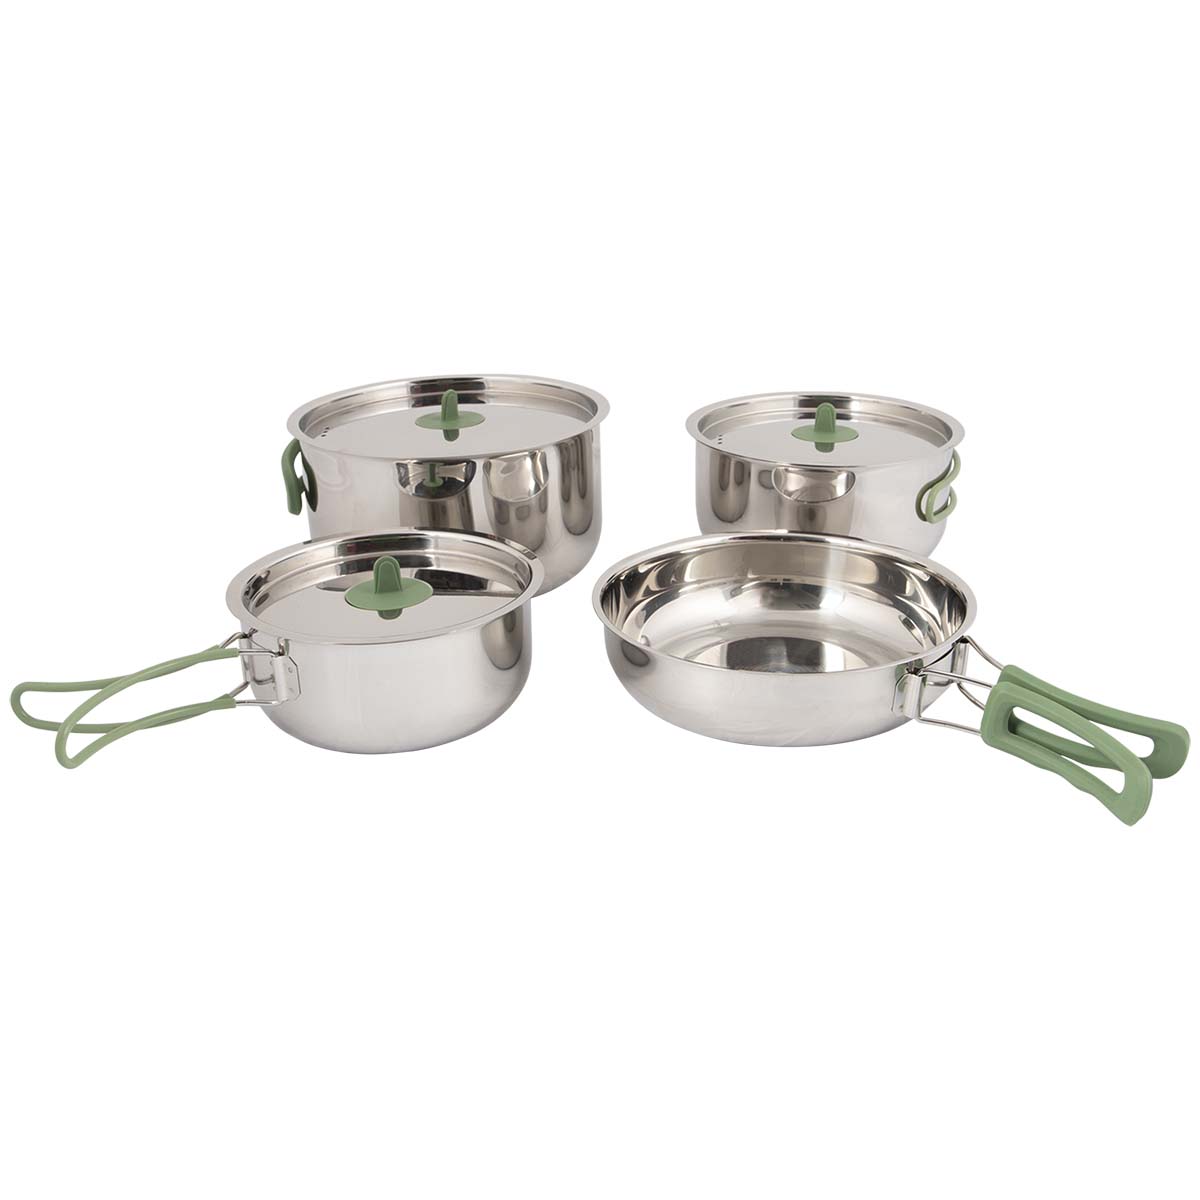 2100800 A luxury 4 part set of cookware set. This set is made of stainless steel and each pan has a heat resistant silicon foldable handle. These handles can be simply folded into the pan after use for compact and easy storage. The lids come with heat resistant silicon knobs. This set consists of  3 (1 litre, 1.5 litre and 2.5 litre) saucepans and 1 frying pan. Øxh saucepans : 14x6.6, 16x8.3 and 18x10 cm. Øxh saucepans: 18x5.5 cm.